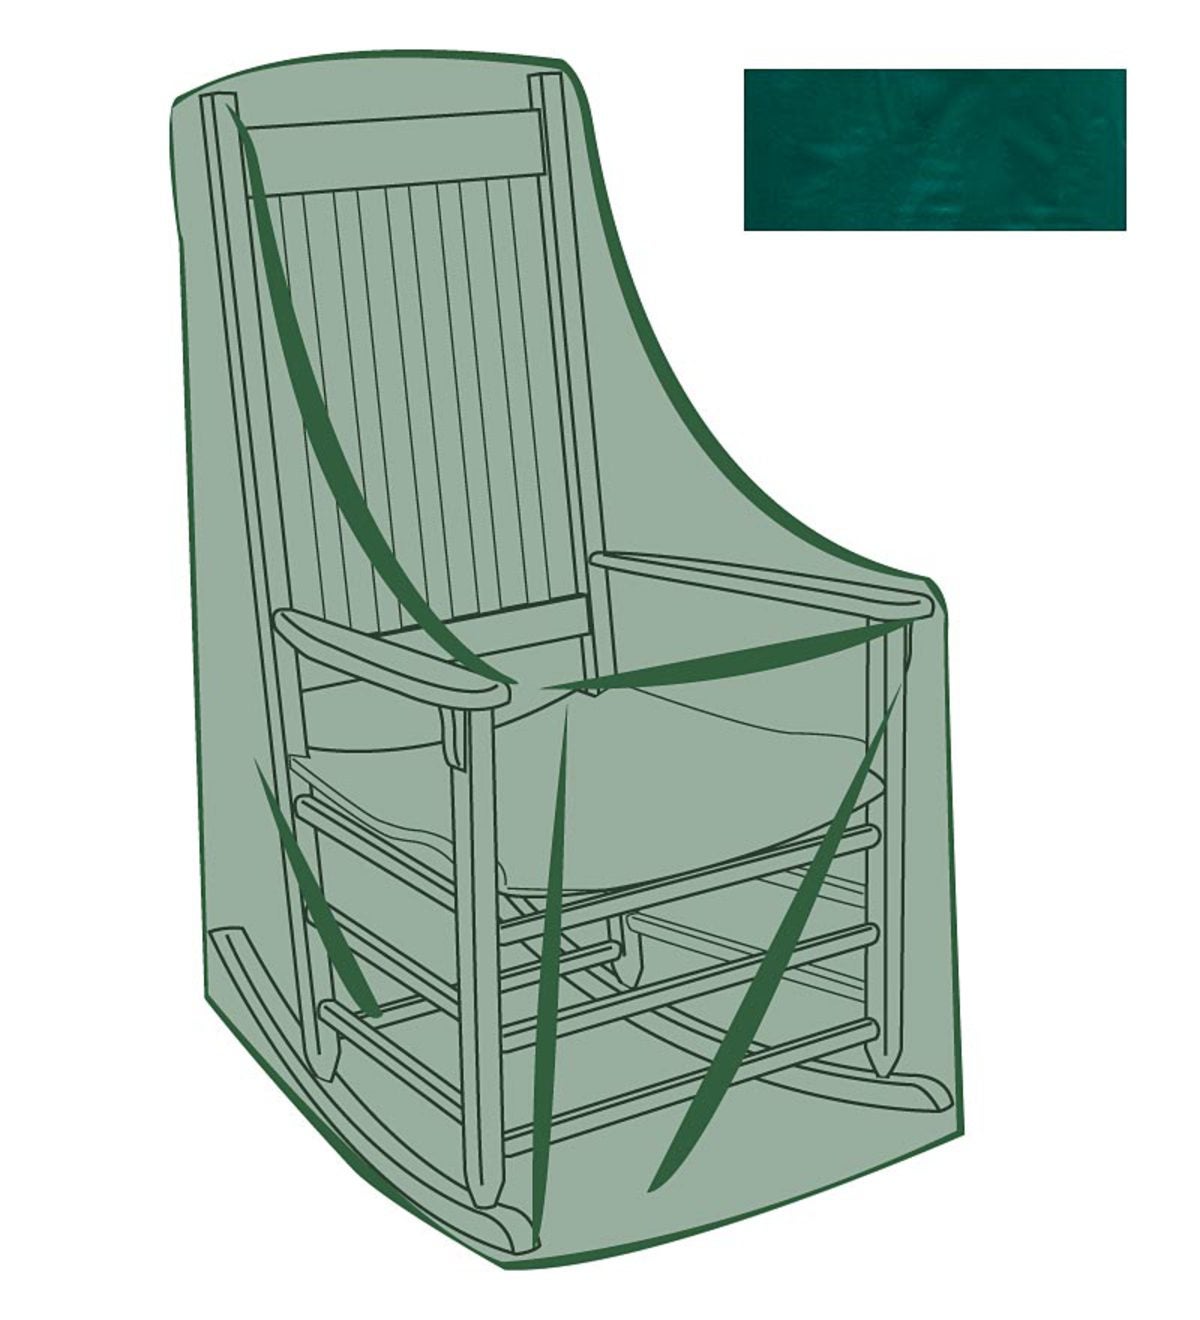 Outdoor Furniture Cover for Rocking Chair in Green | eBay